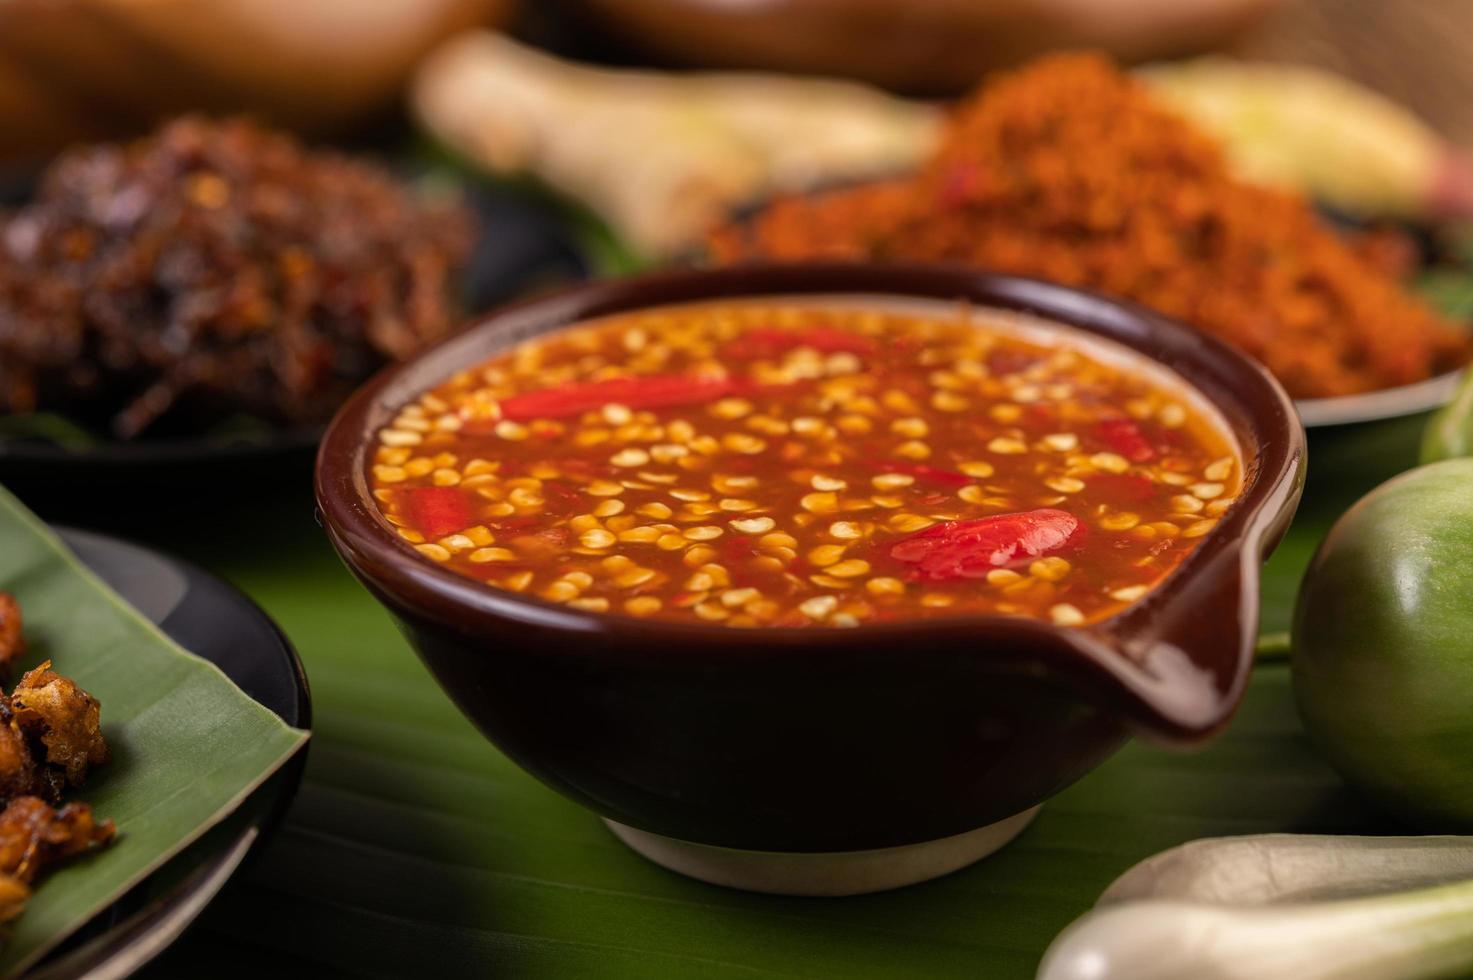 Chili sauce and ingredients on banana leaves photo